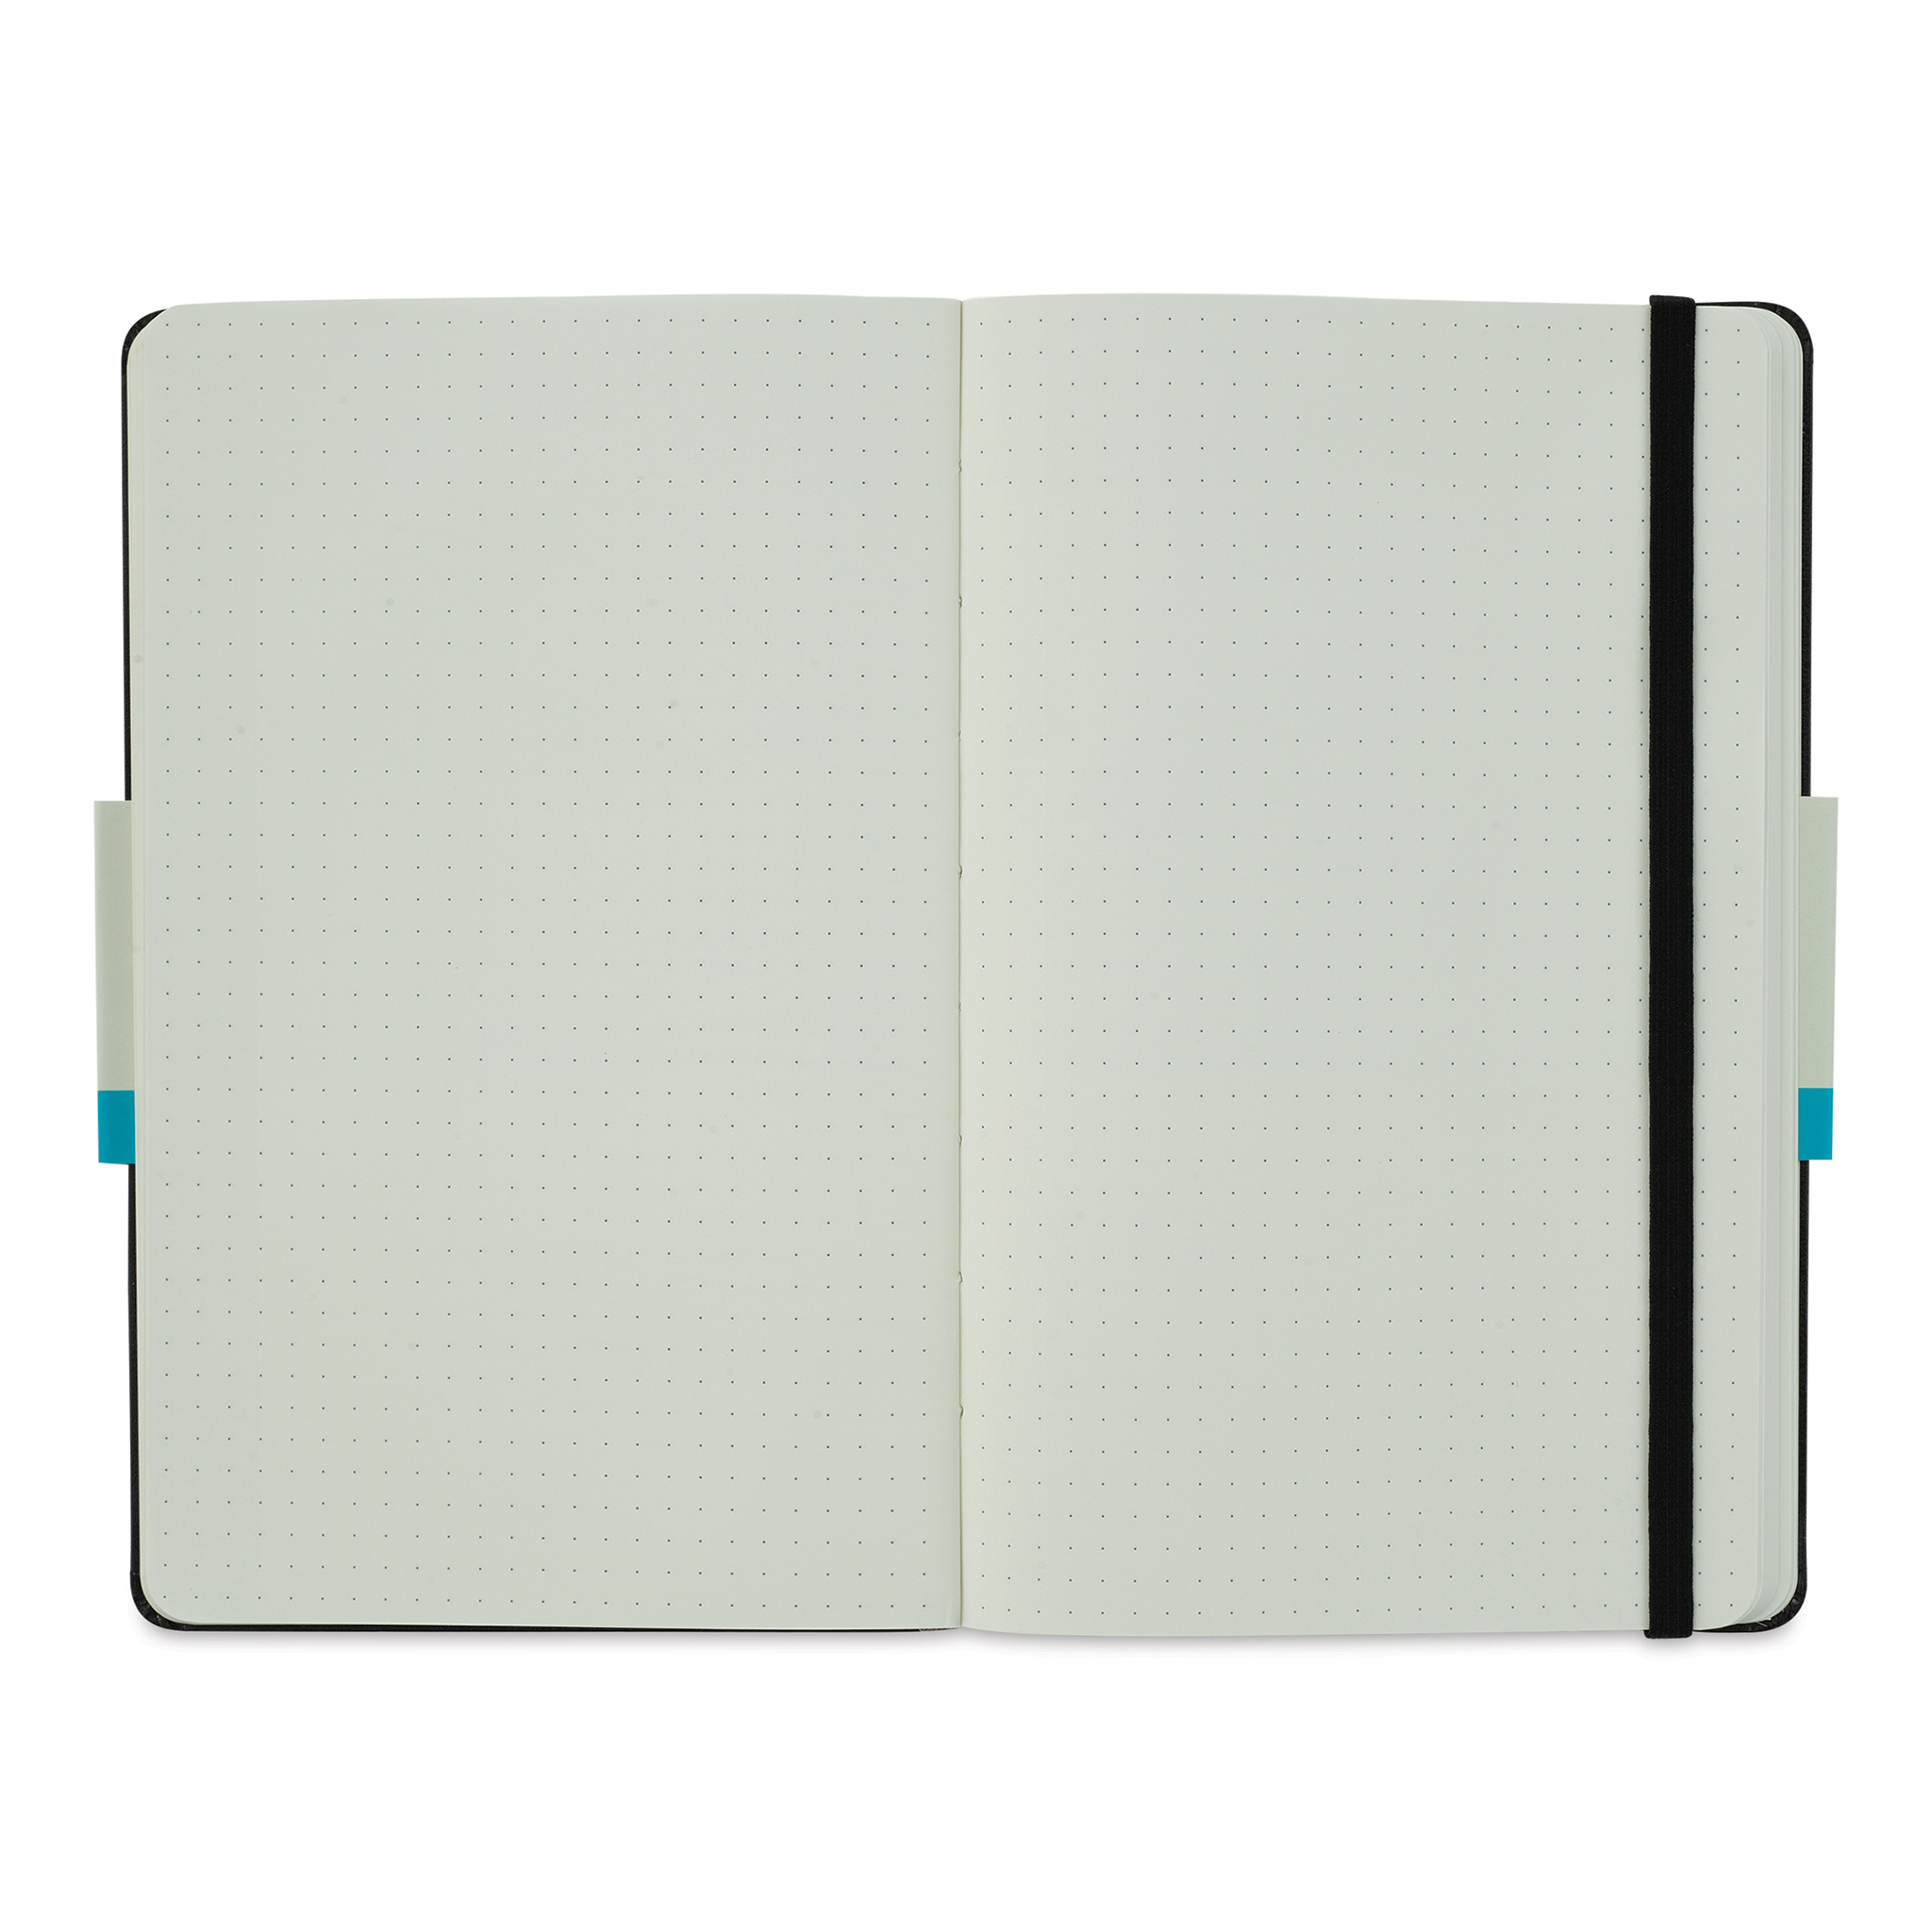 Moleskine Classic Hard Cover Notebook, 5 x 8-1/4, Dotted, 240 Pages, Black